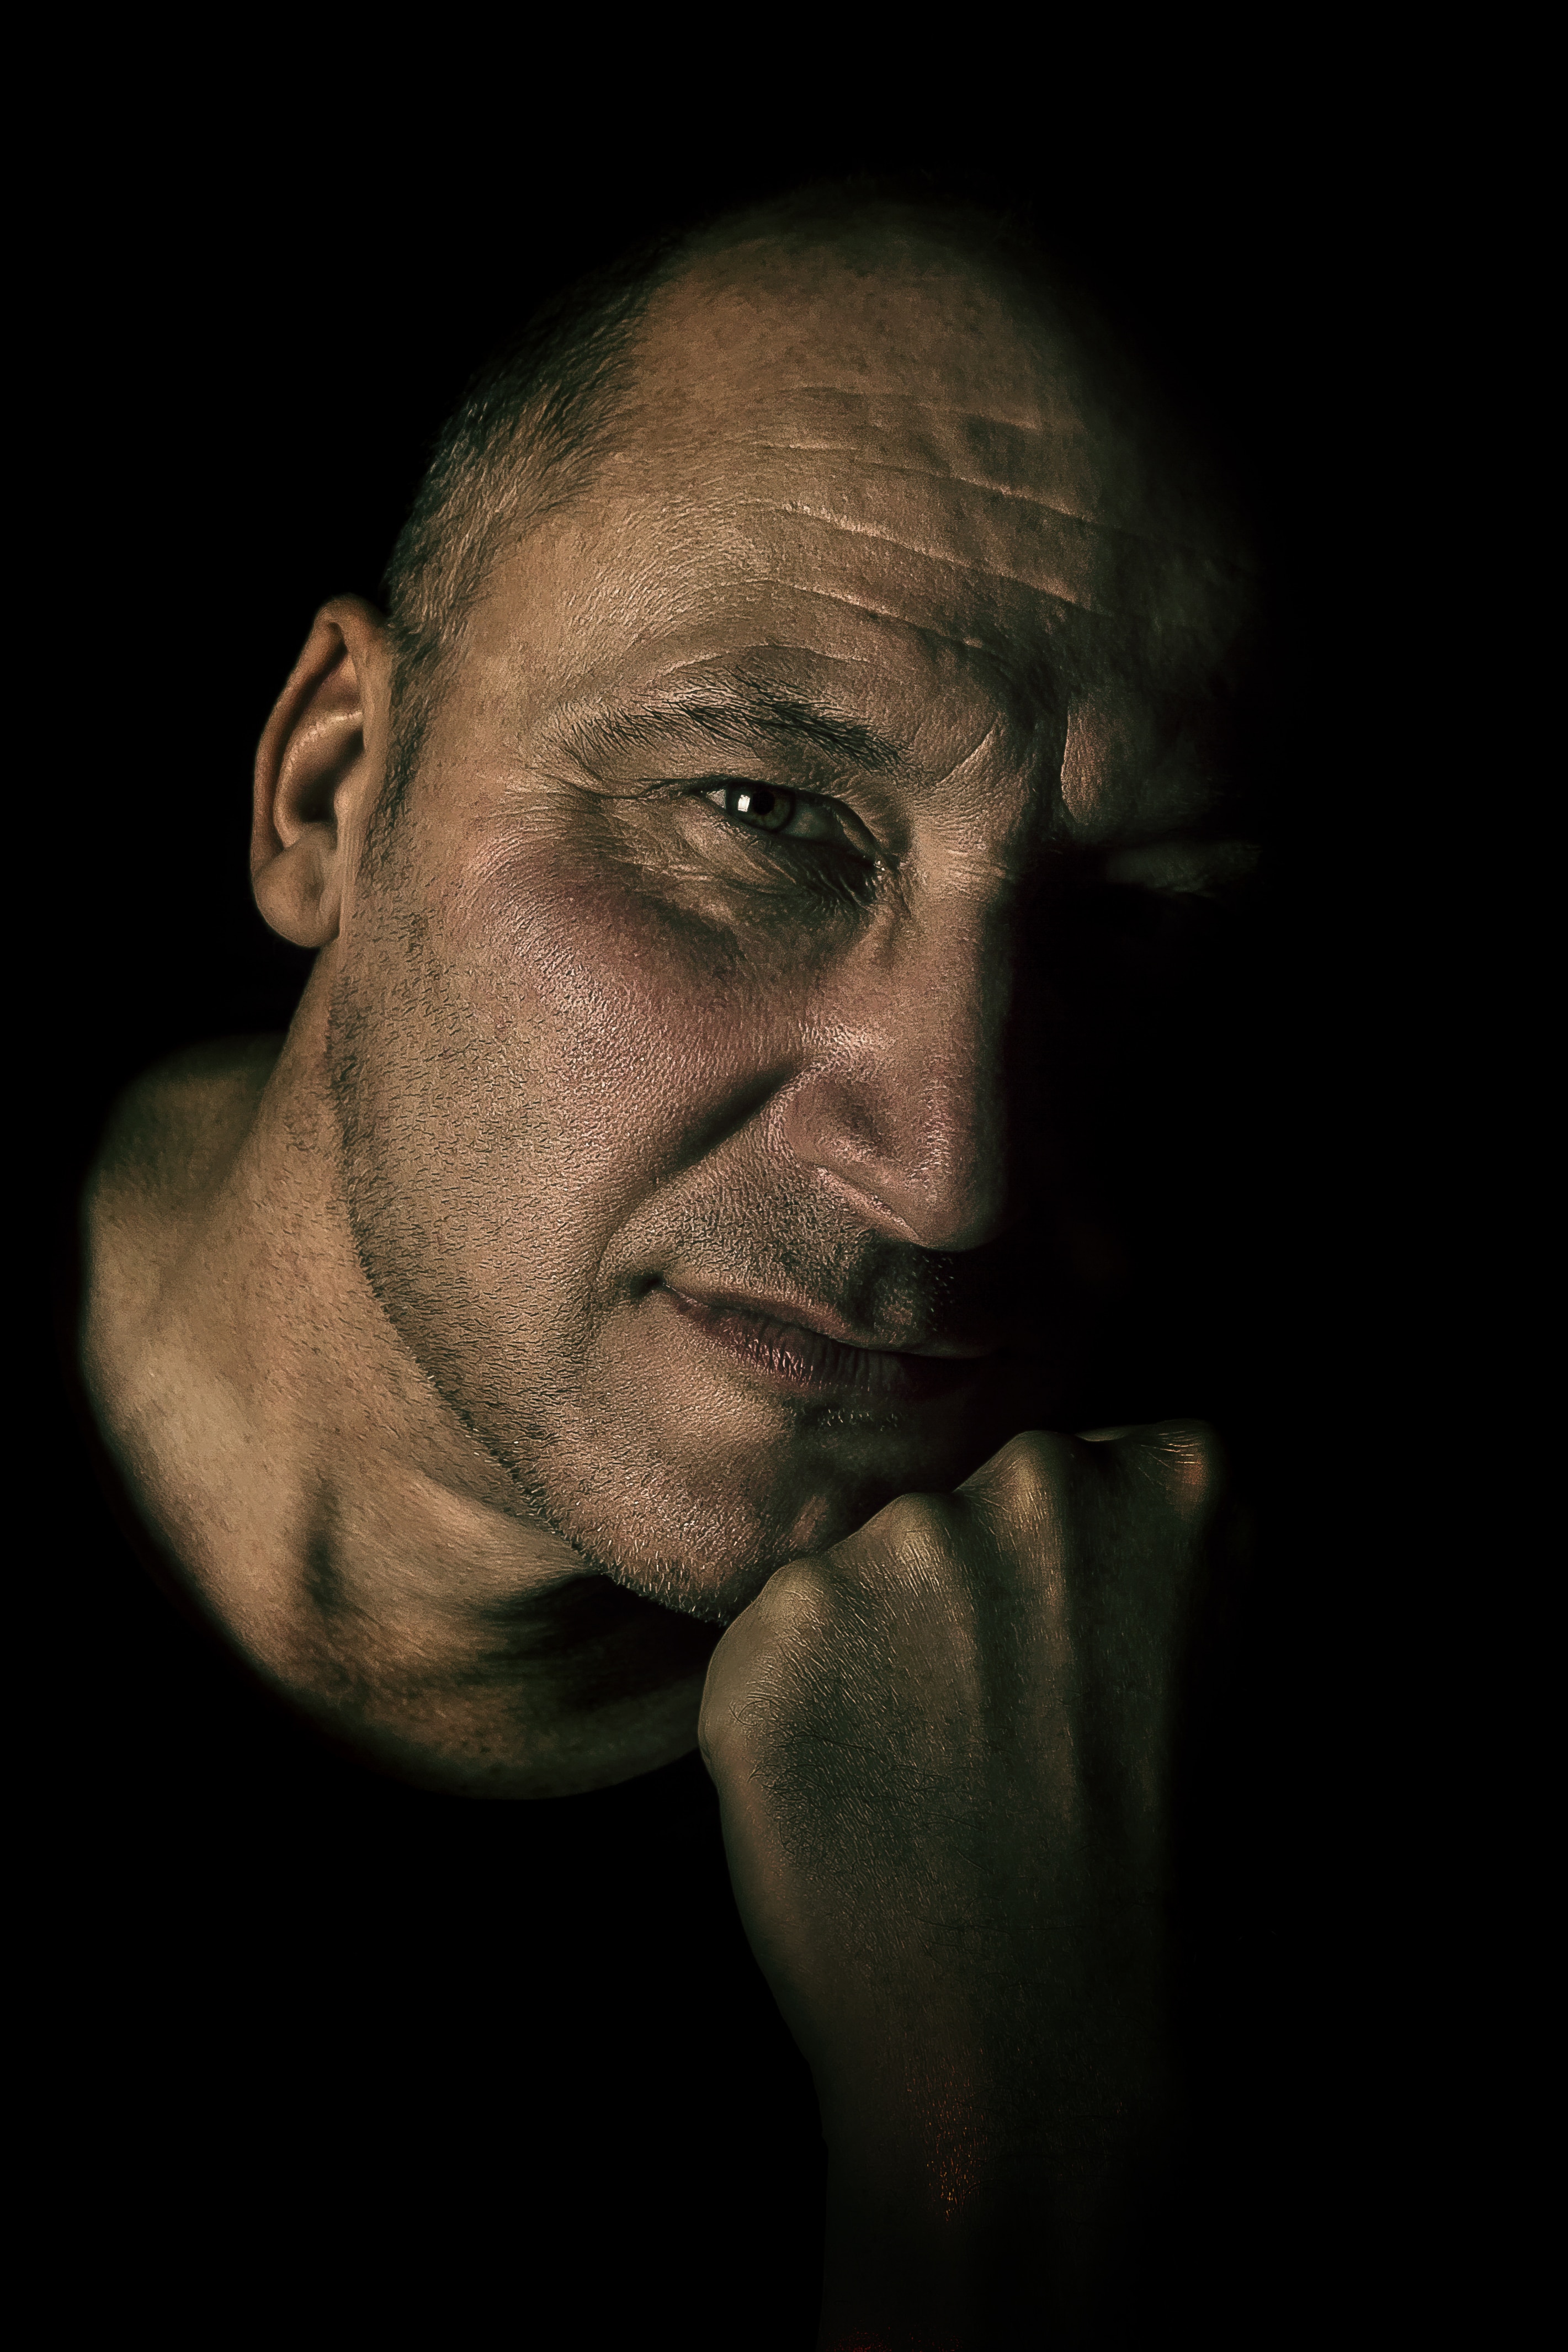 man in black t shirt leaning on his arm in dark background